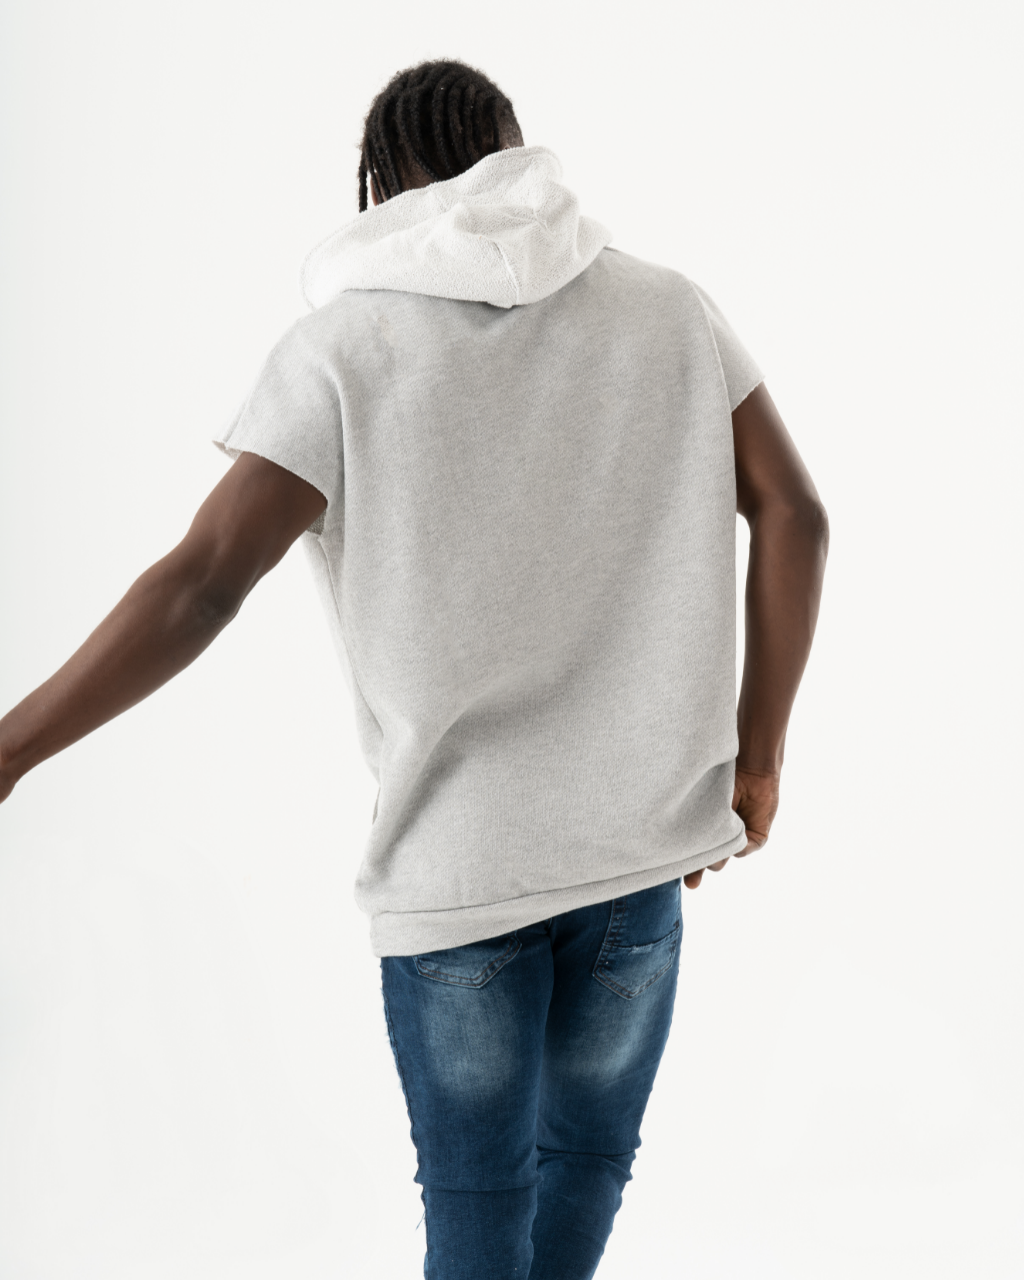 A man wearing a BACHELOR HOODIE | WHITE and jeans.